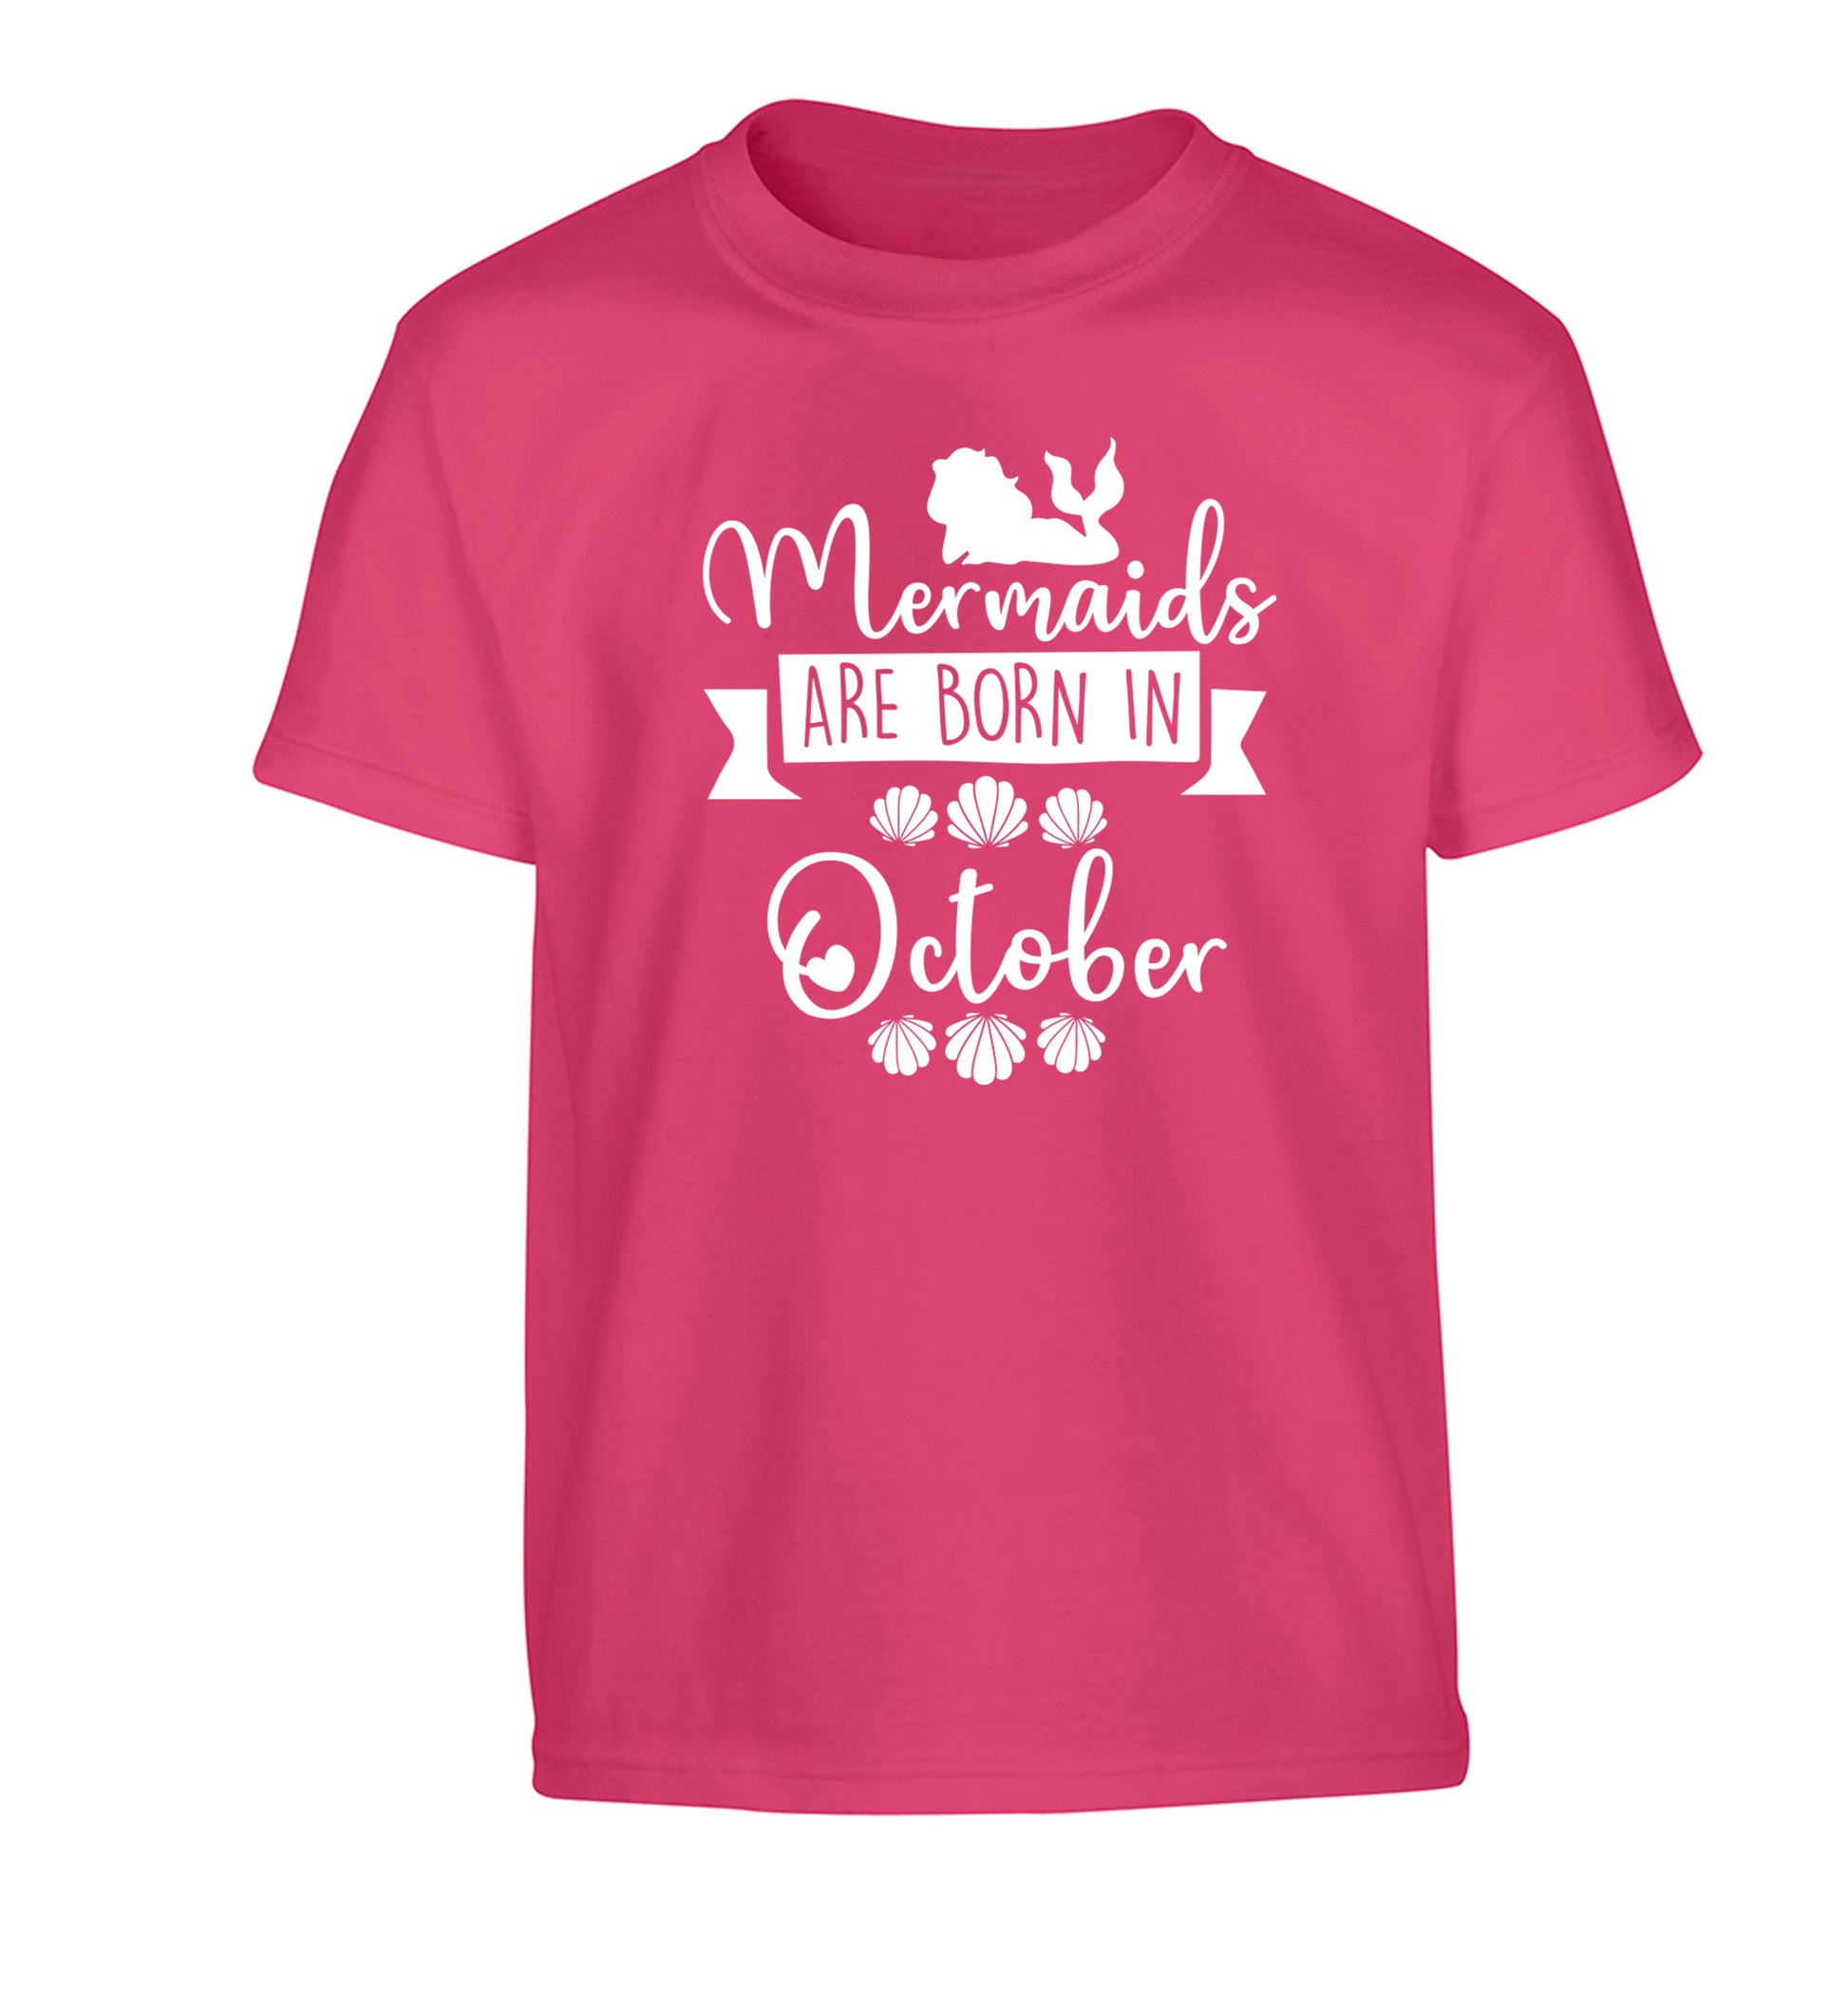 Mermaids are born in October Children's pink Tshirt 12-13 Years